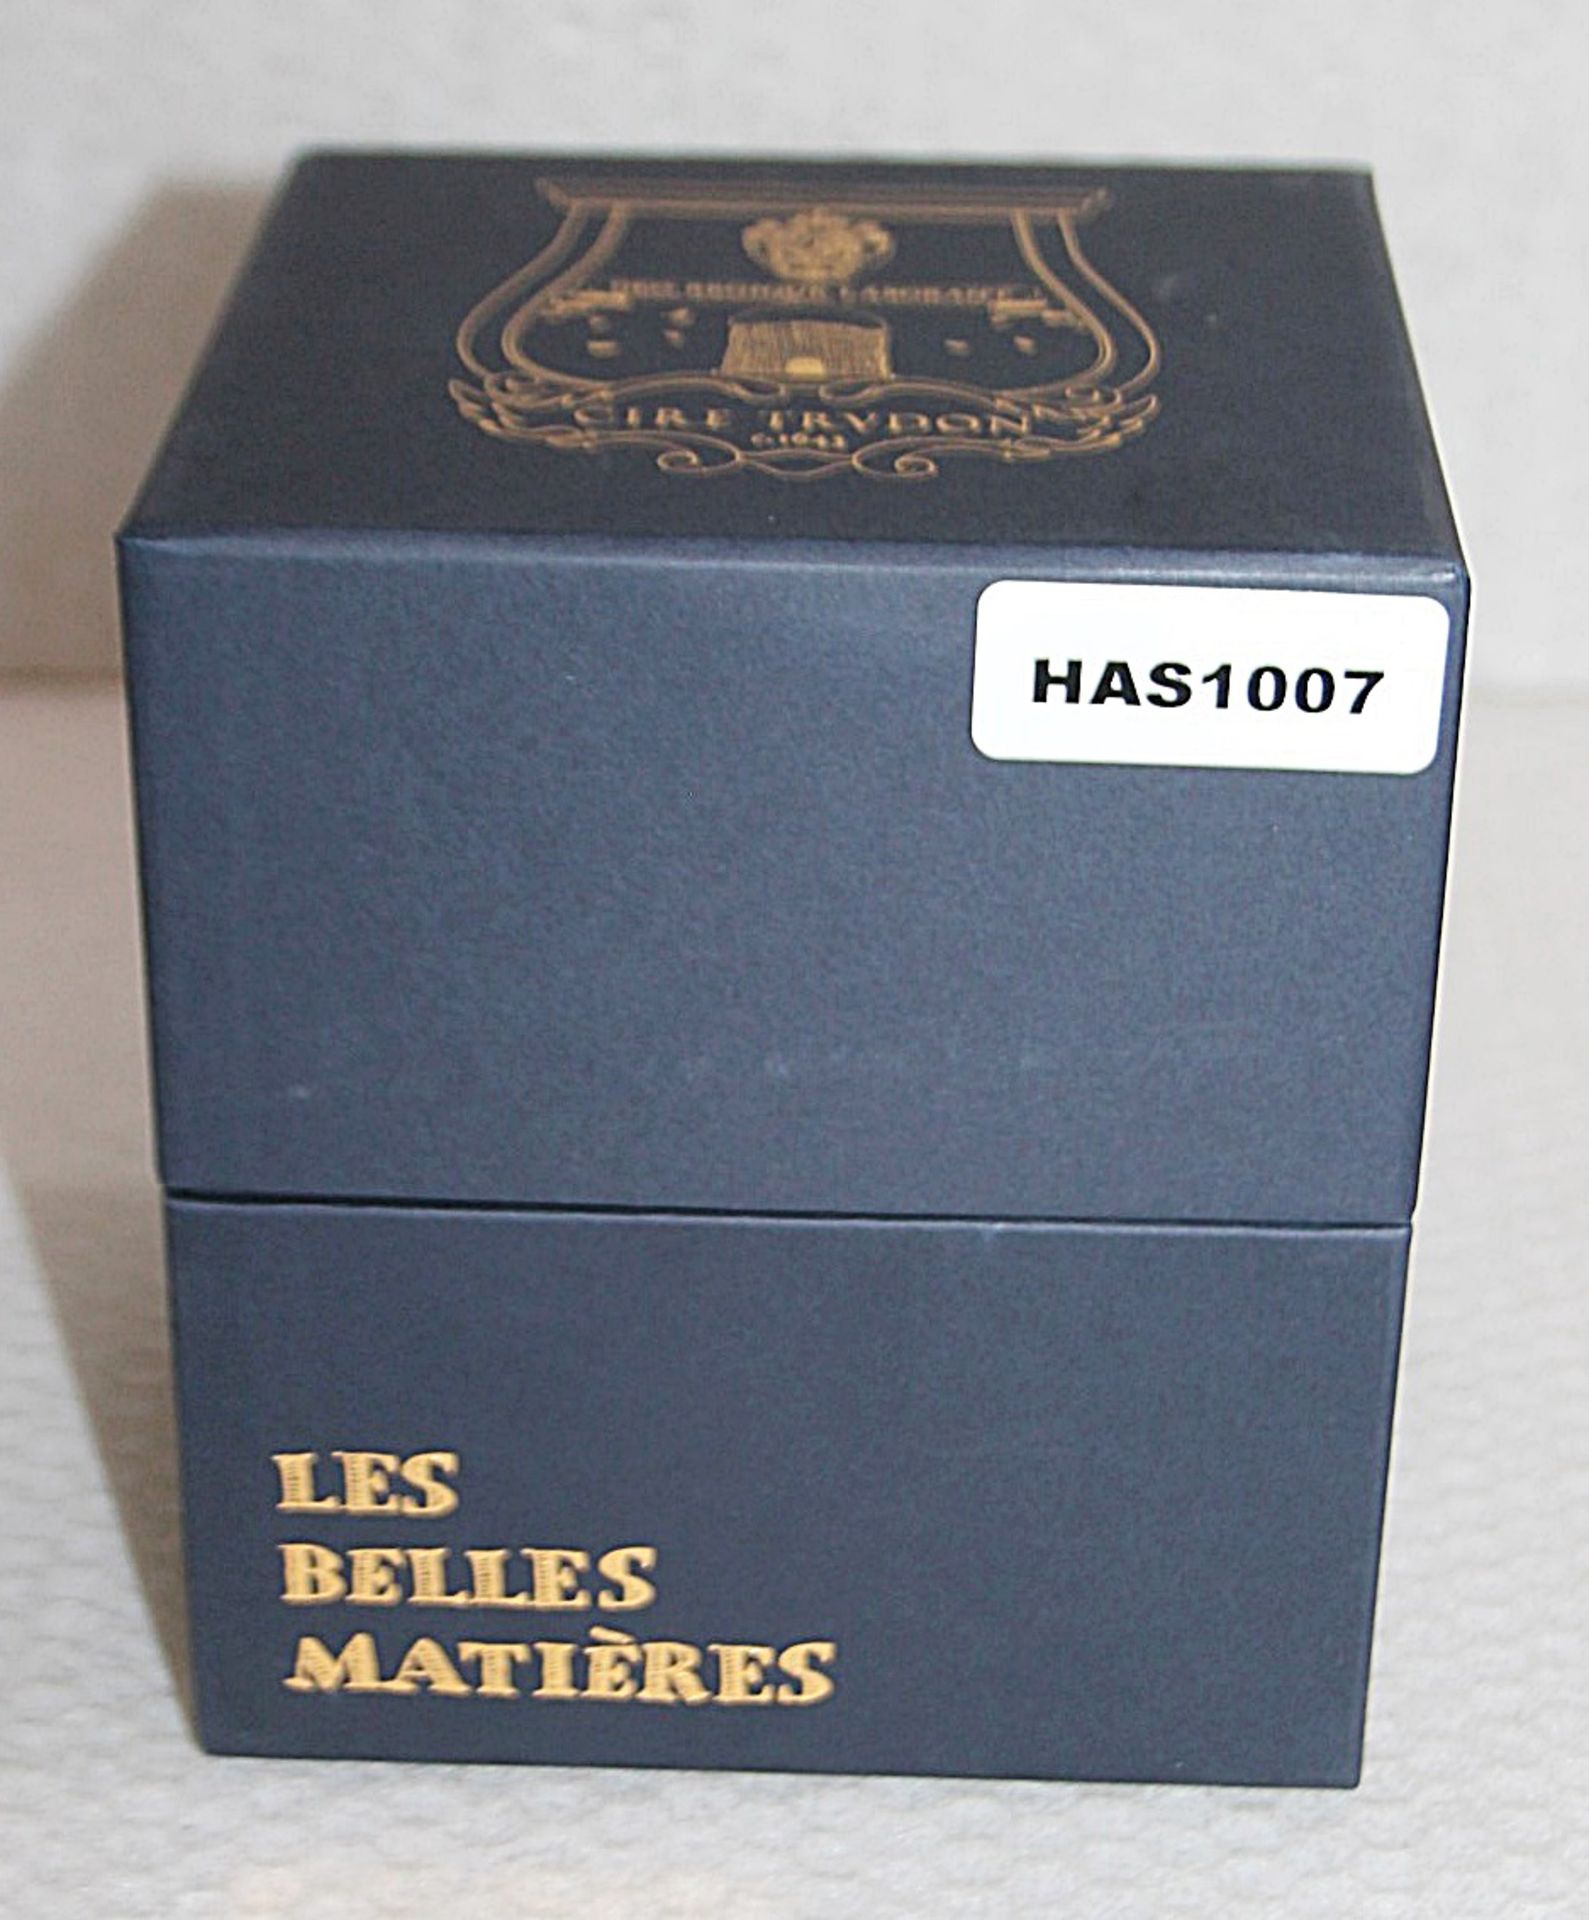 1 x TRUDON 'Les Belles Matières Maduraï' Luxury French Floral Scented Candle (800g) - RRP £230.00 - Image 6 of 10